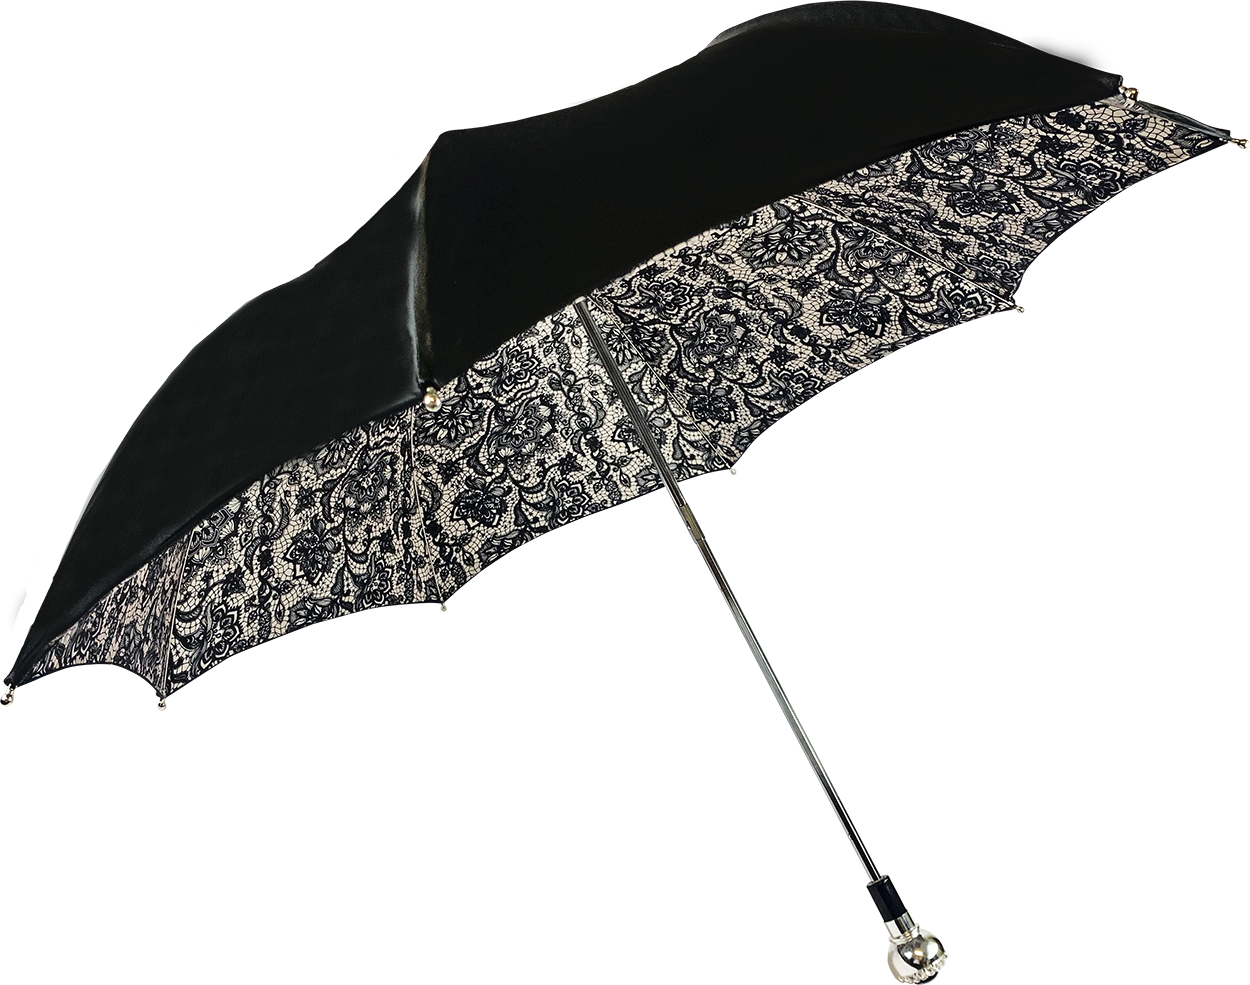 Folding double canopy umbrella with lace design